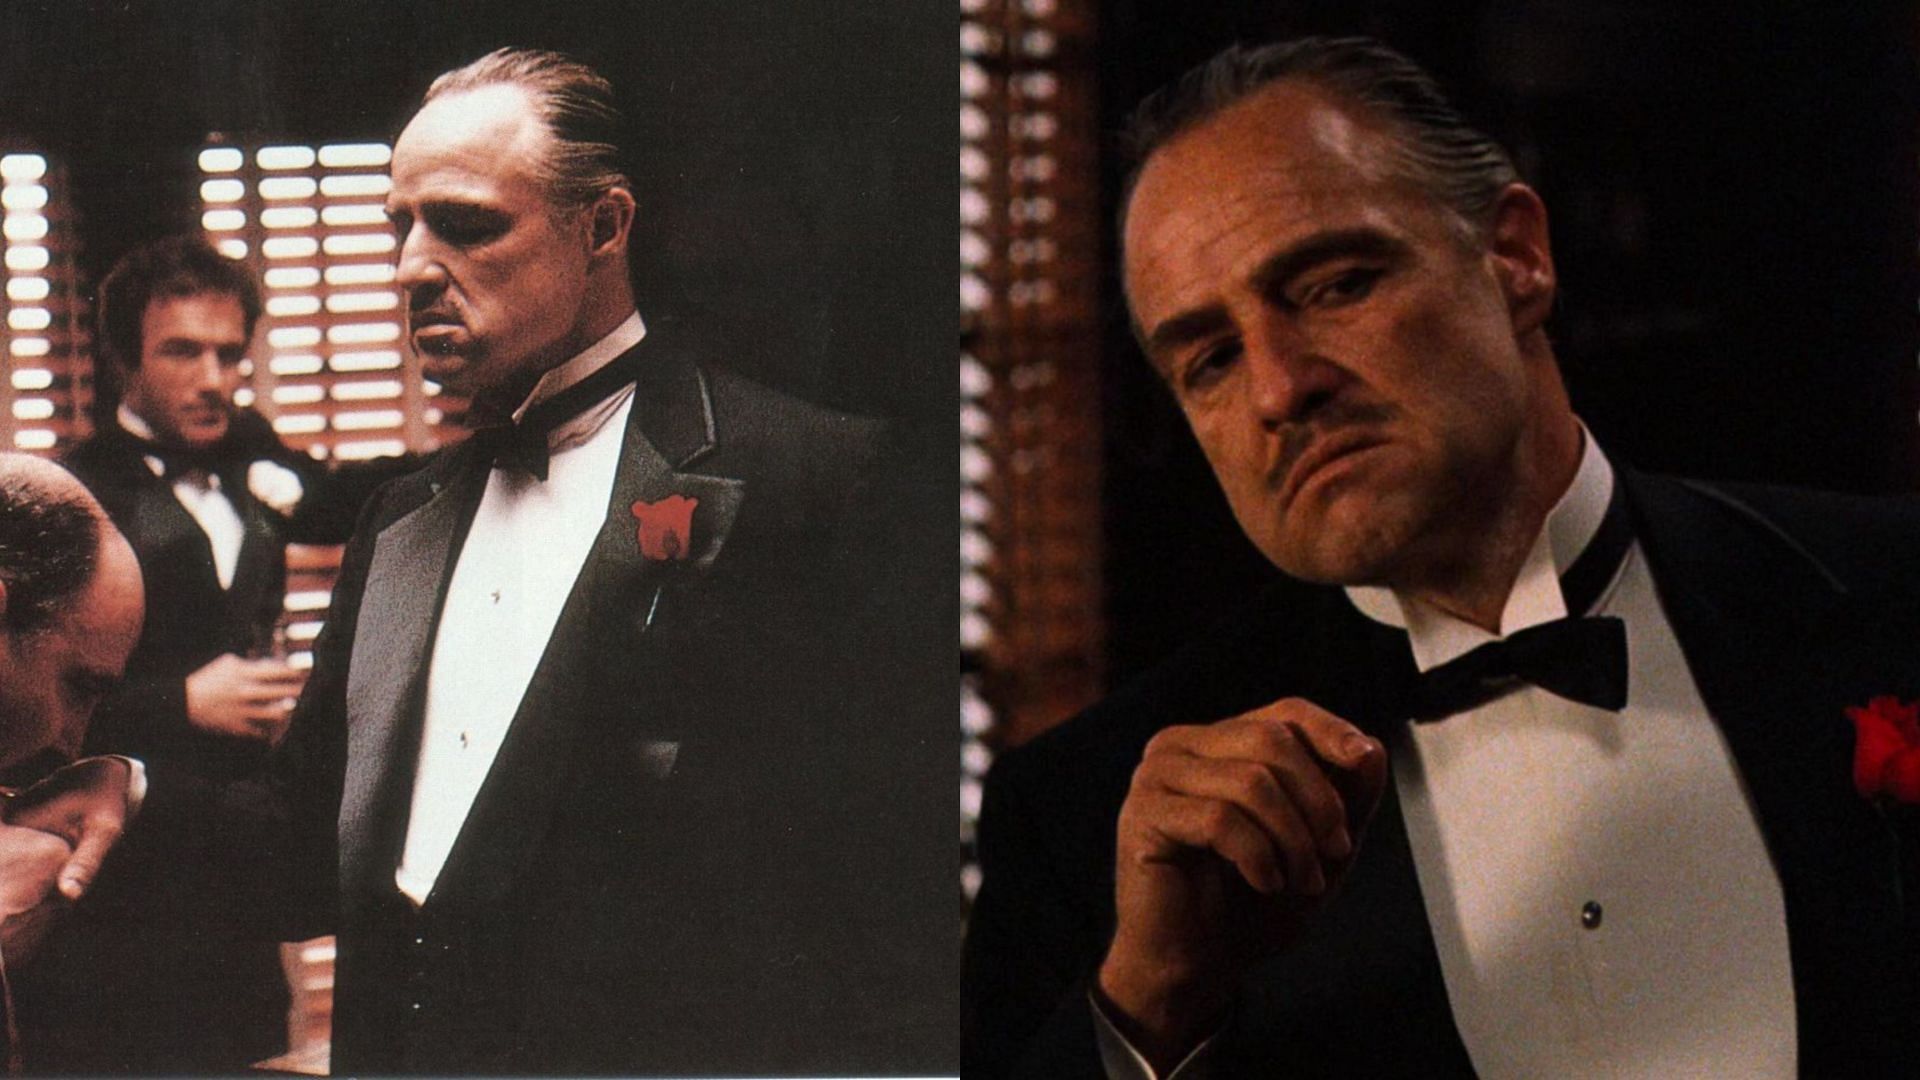 Don Corleone is a lead character in the Godfather film trilogy